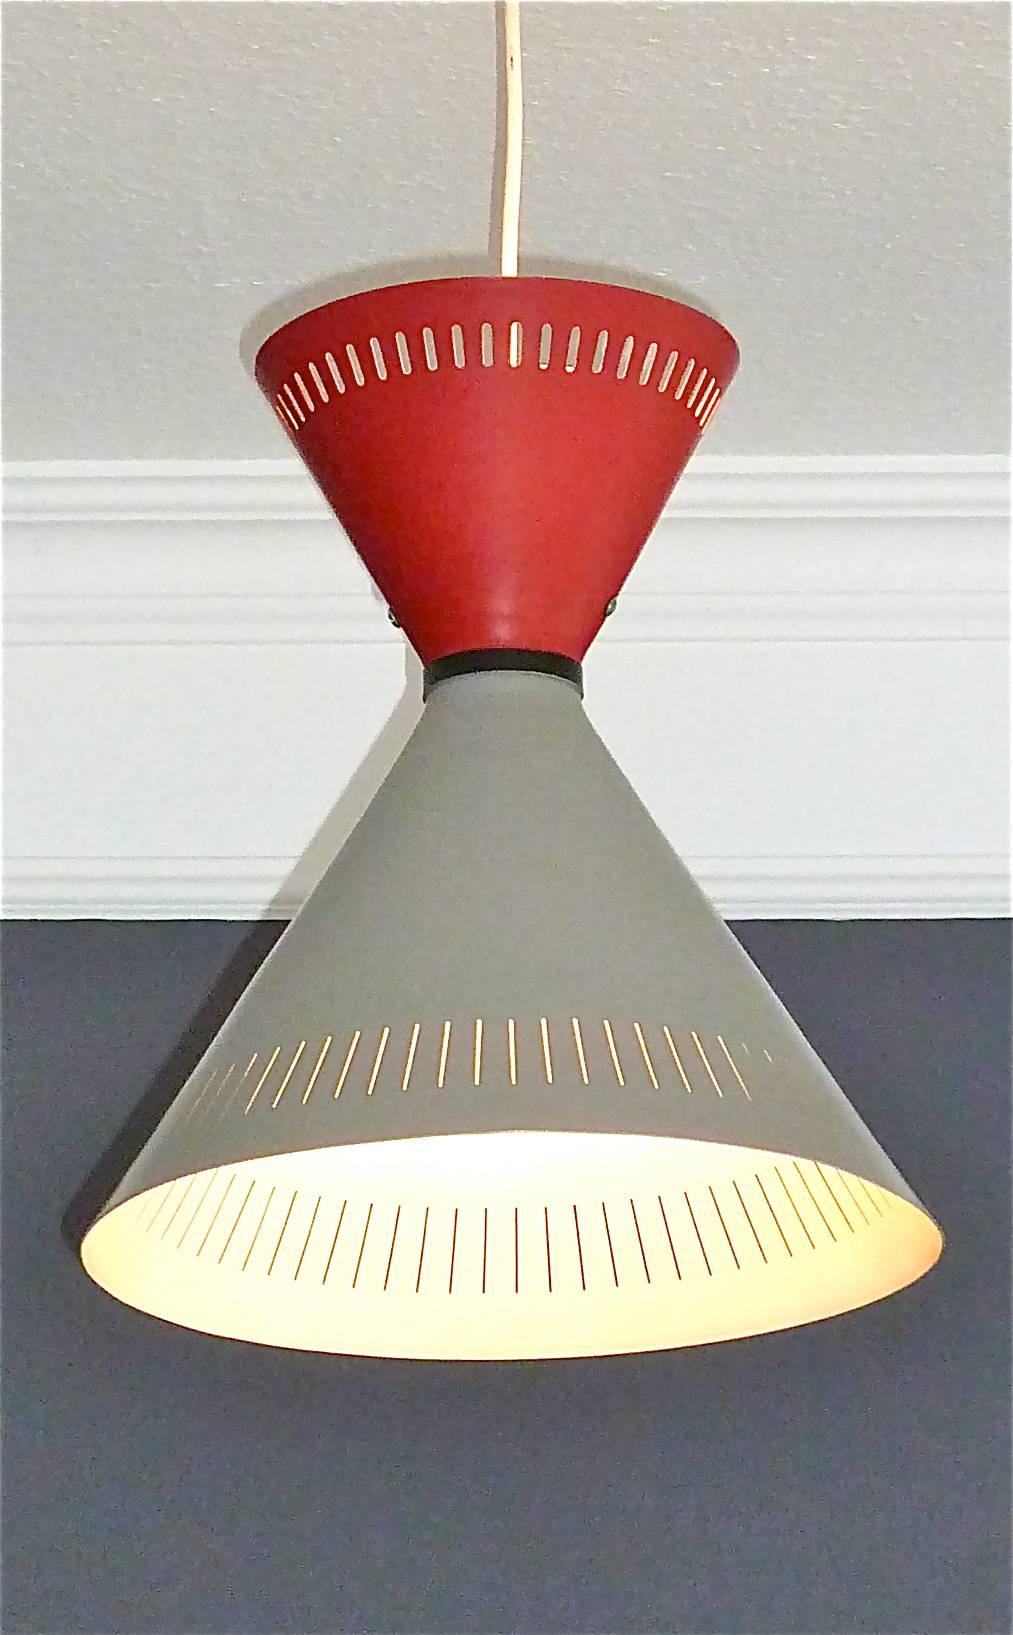 Rare and stunning big Italian pendant lamp and matching wall light executed in the 1950s with attribution to one of the famous companies and designers Stilnovo, Arteluce, Lumi, Arredoluce and Sarfatti. The pendant lamp has an adjustable  total